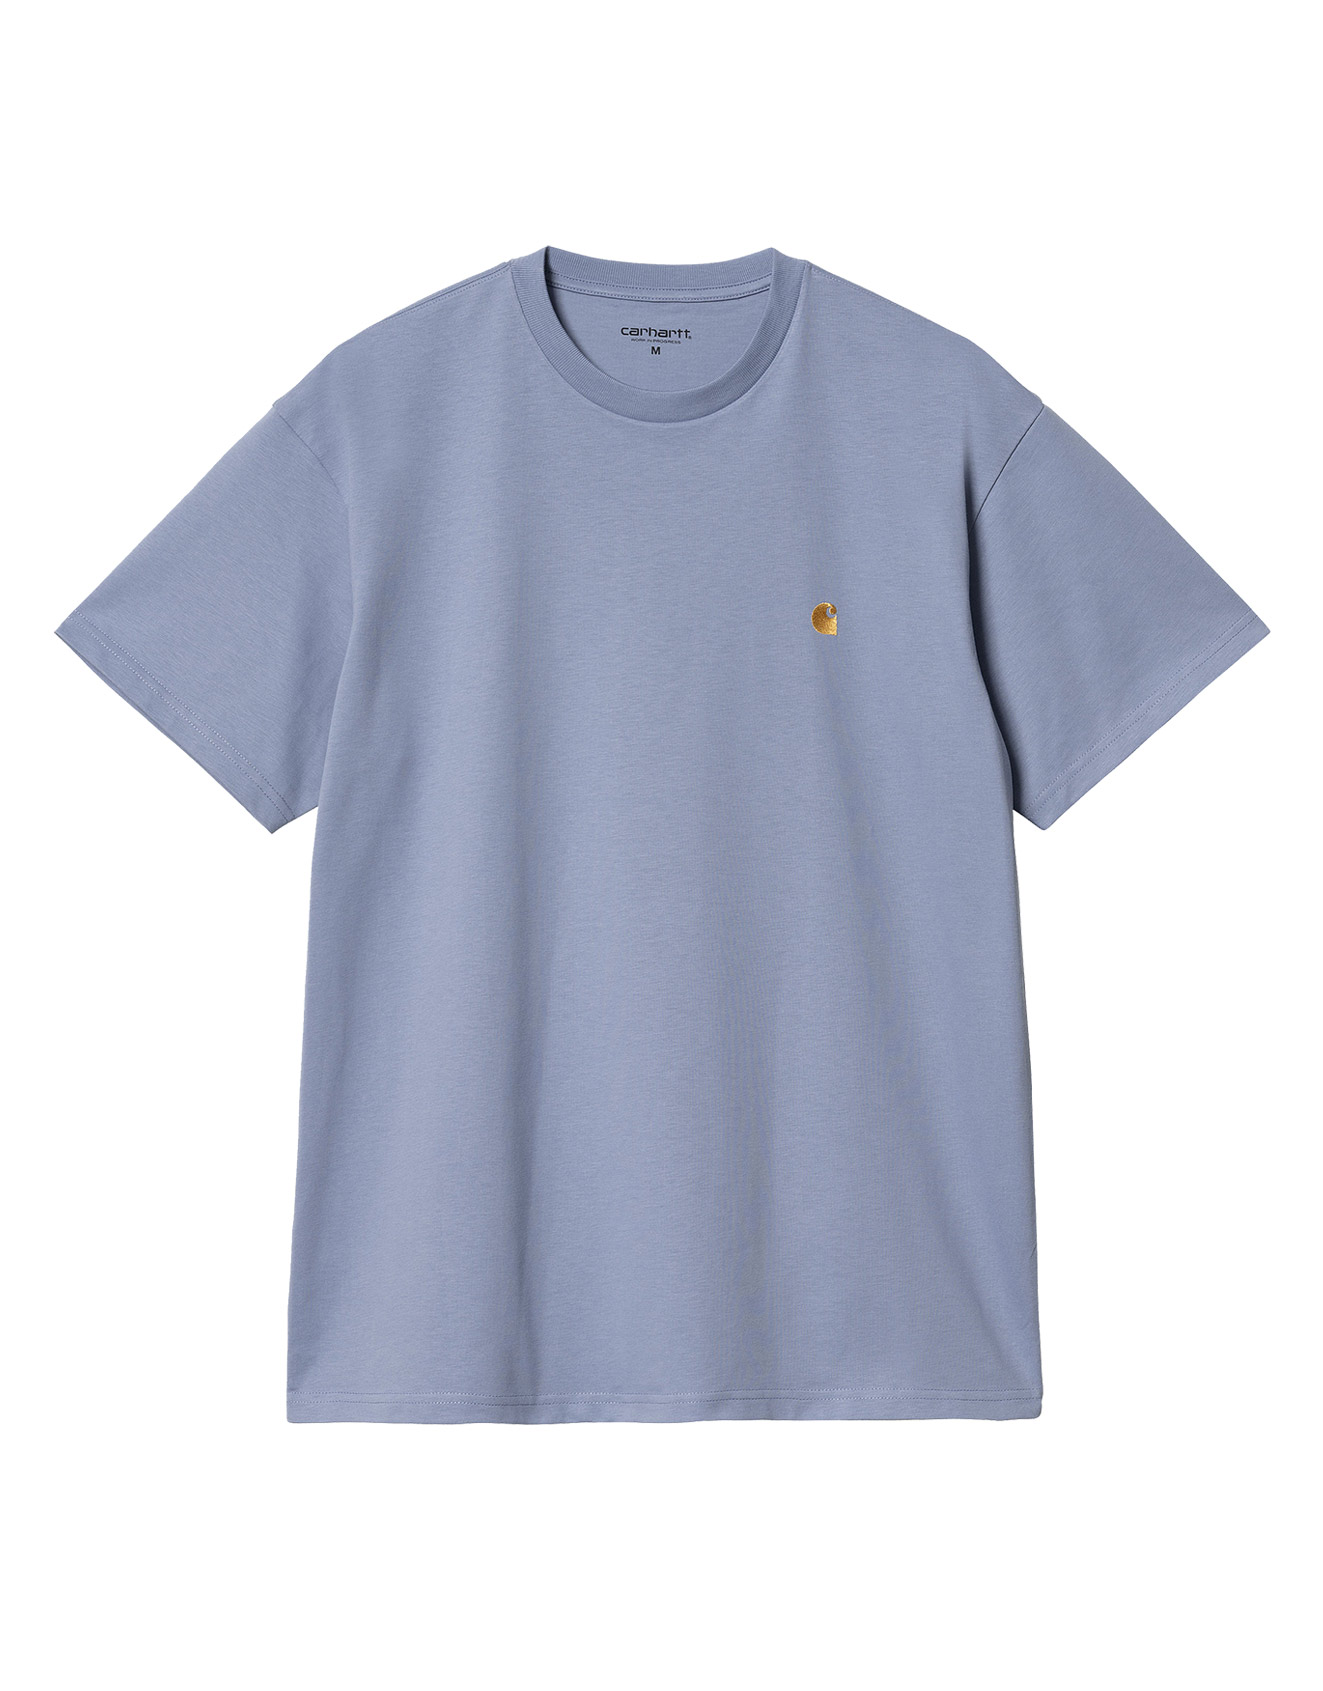 Carhartt WIP – S/S Chase T-Shirt